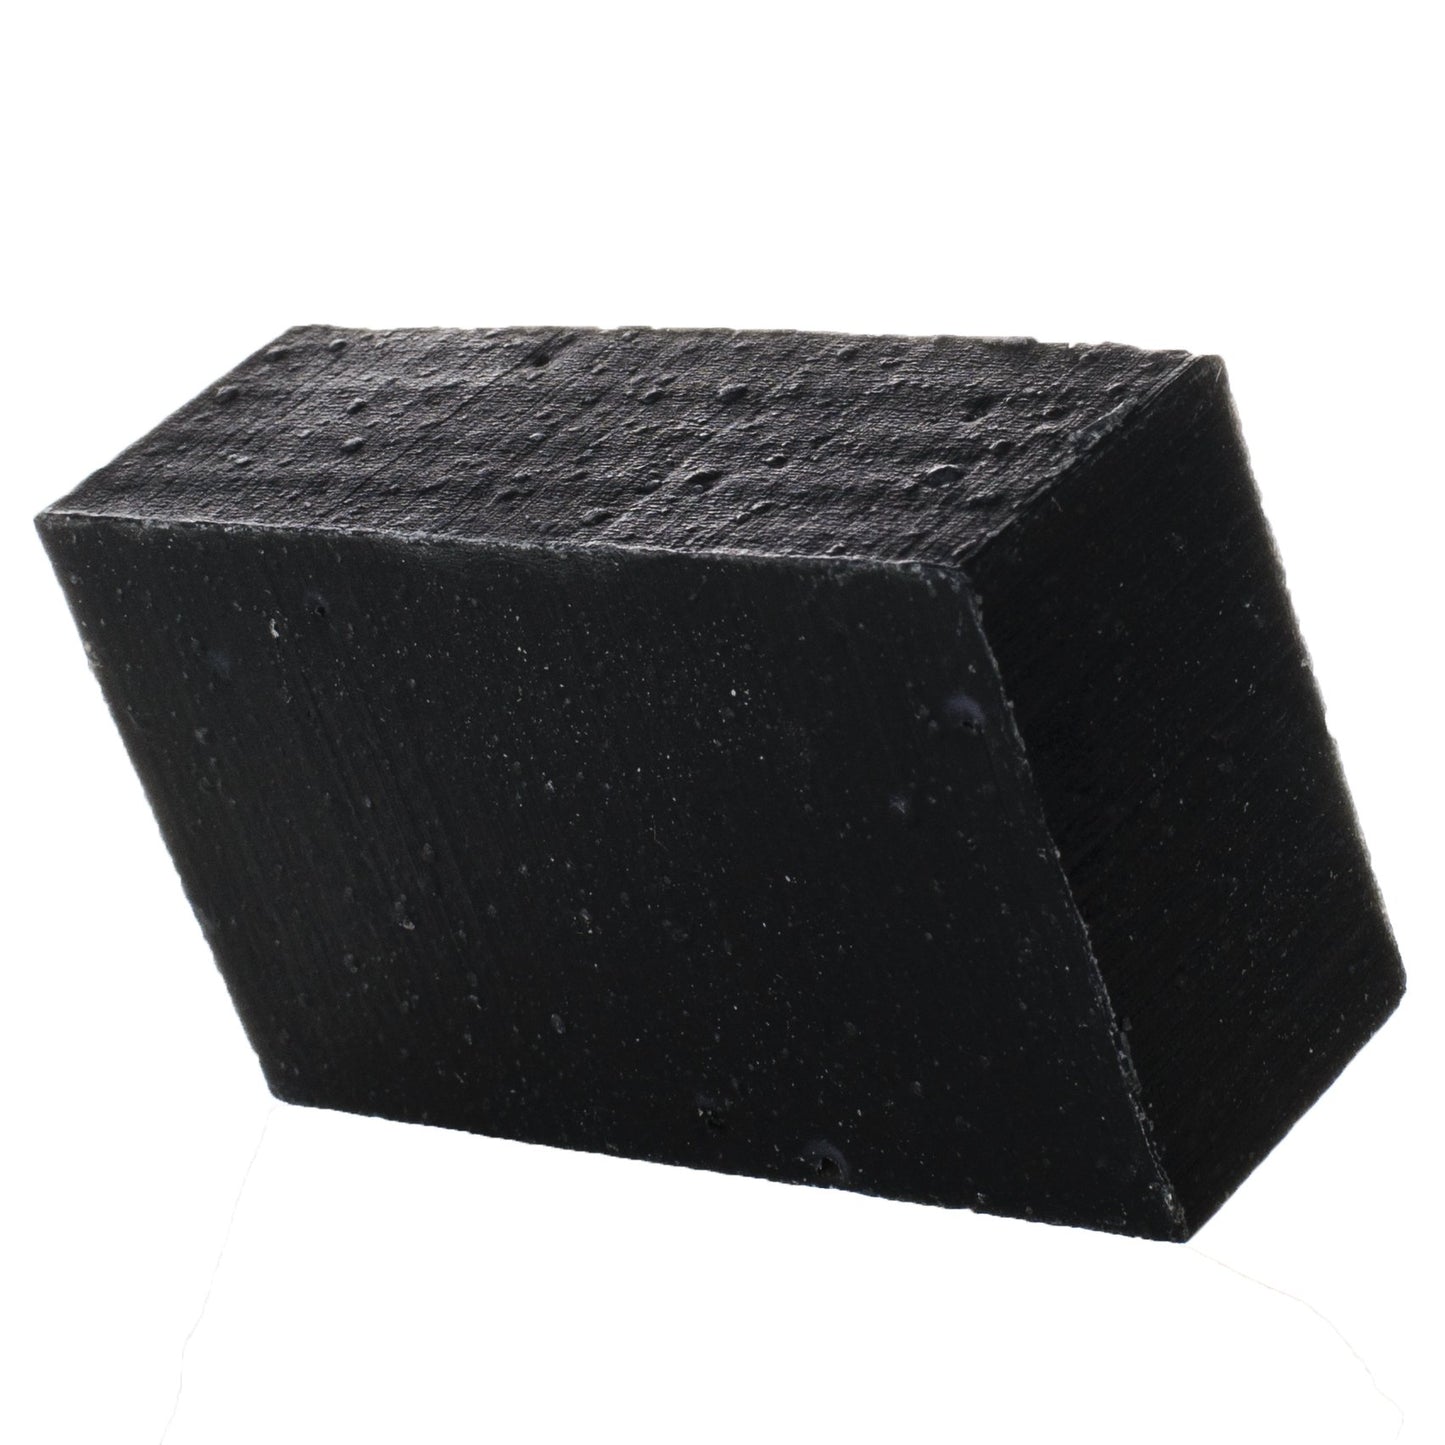 LIVING LIBATIONS Cleansing Charcoal Soap 1 bar of soap